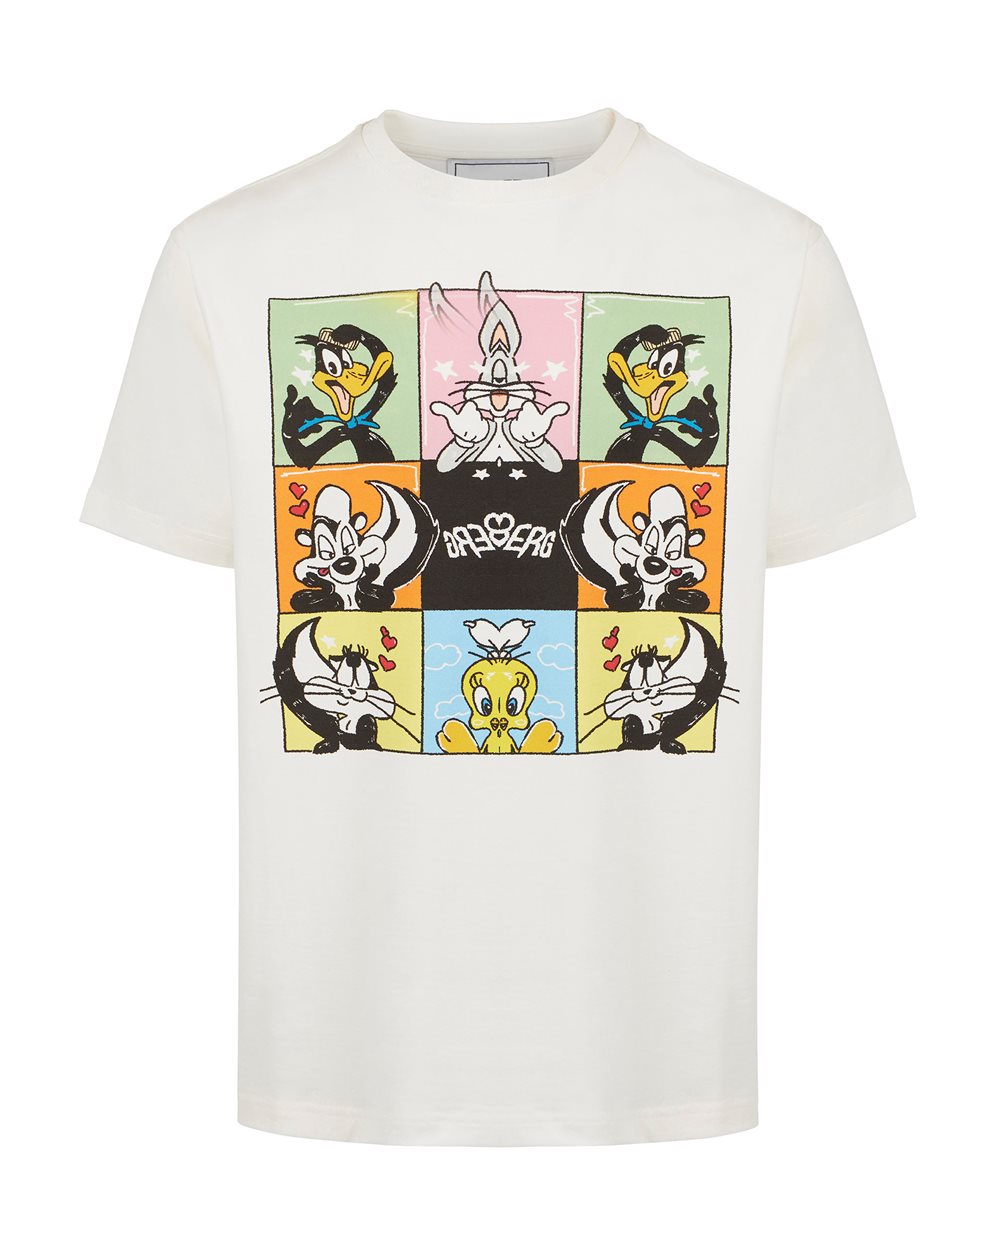 T-shirt with cartoon graphics and logo - T-shirts & polo | Iceberg - Official Website